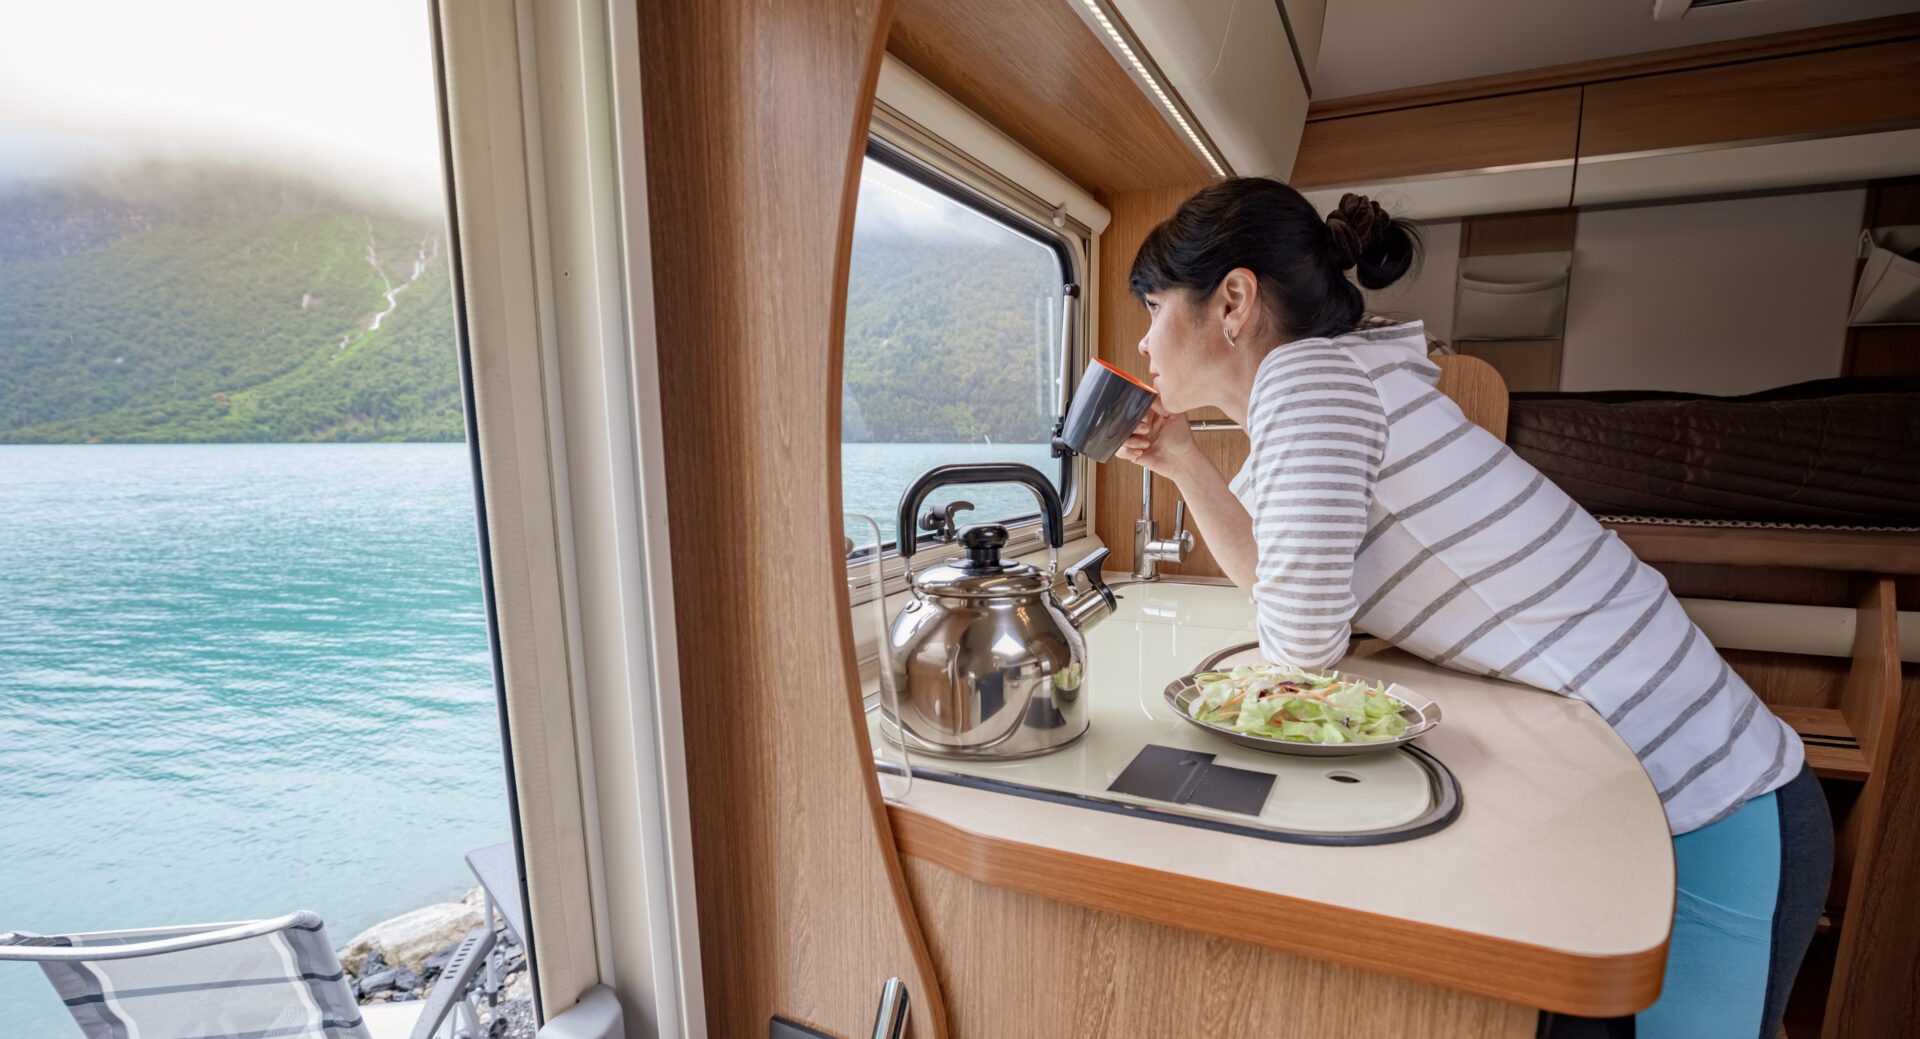 Woman,In,The,Interior,Of,A,Camper,Rv,Motorhome,With